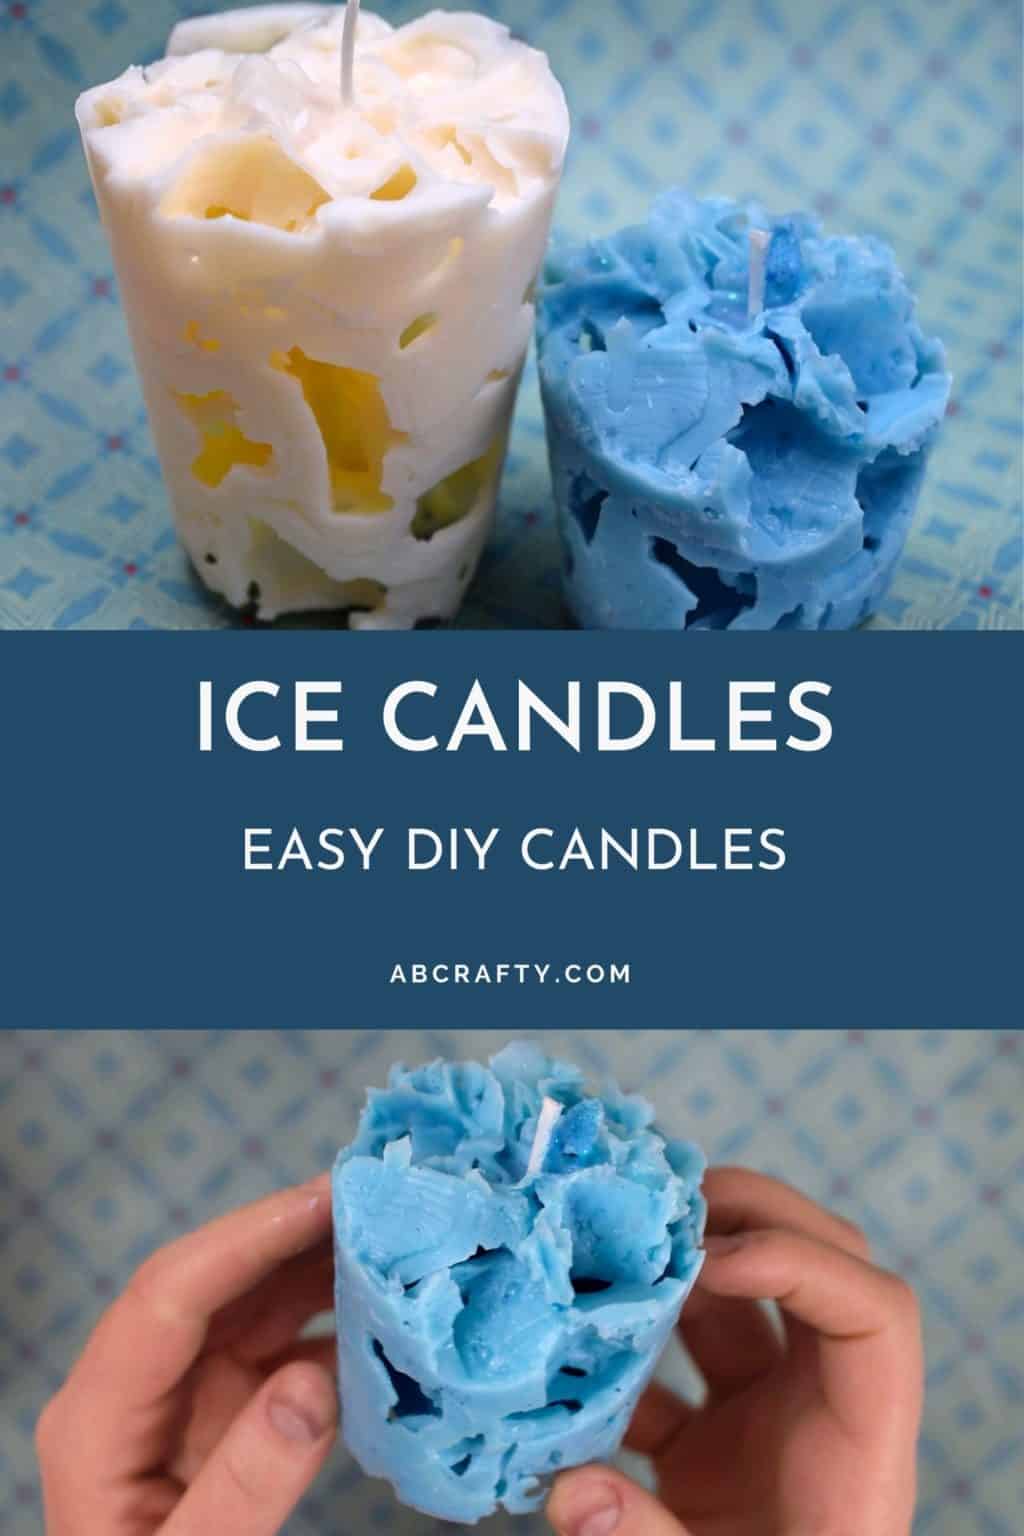 Photo of blue and white ice candles on top and holding a blue handmade candle on bottom with the title "ice candles, easy diy candles, abcrafty.com" in the middle